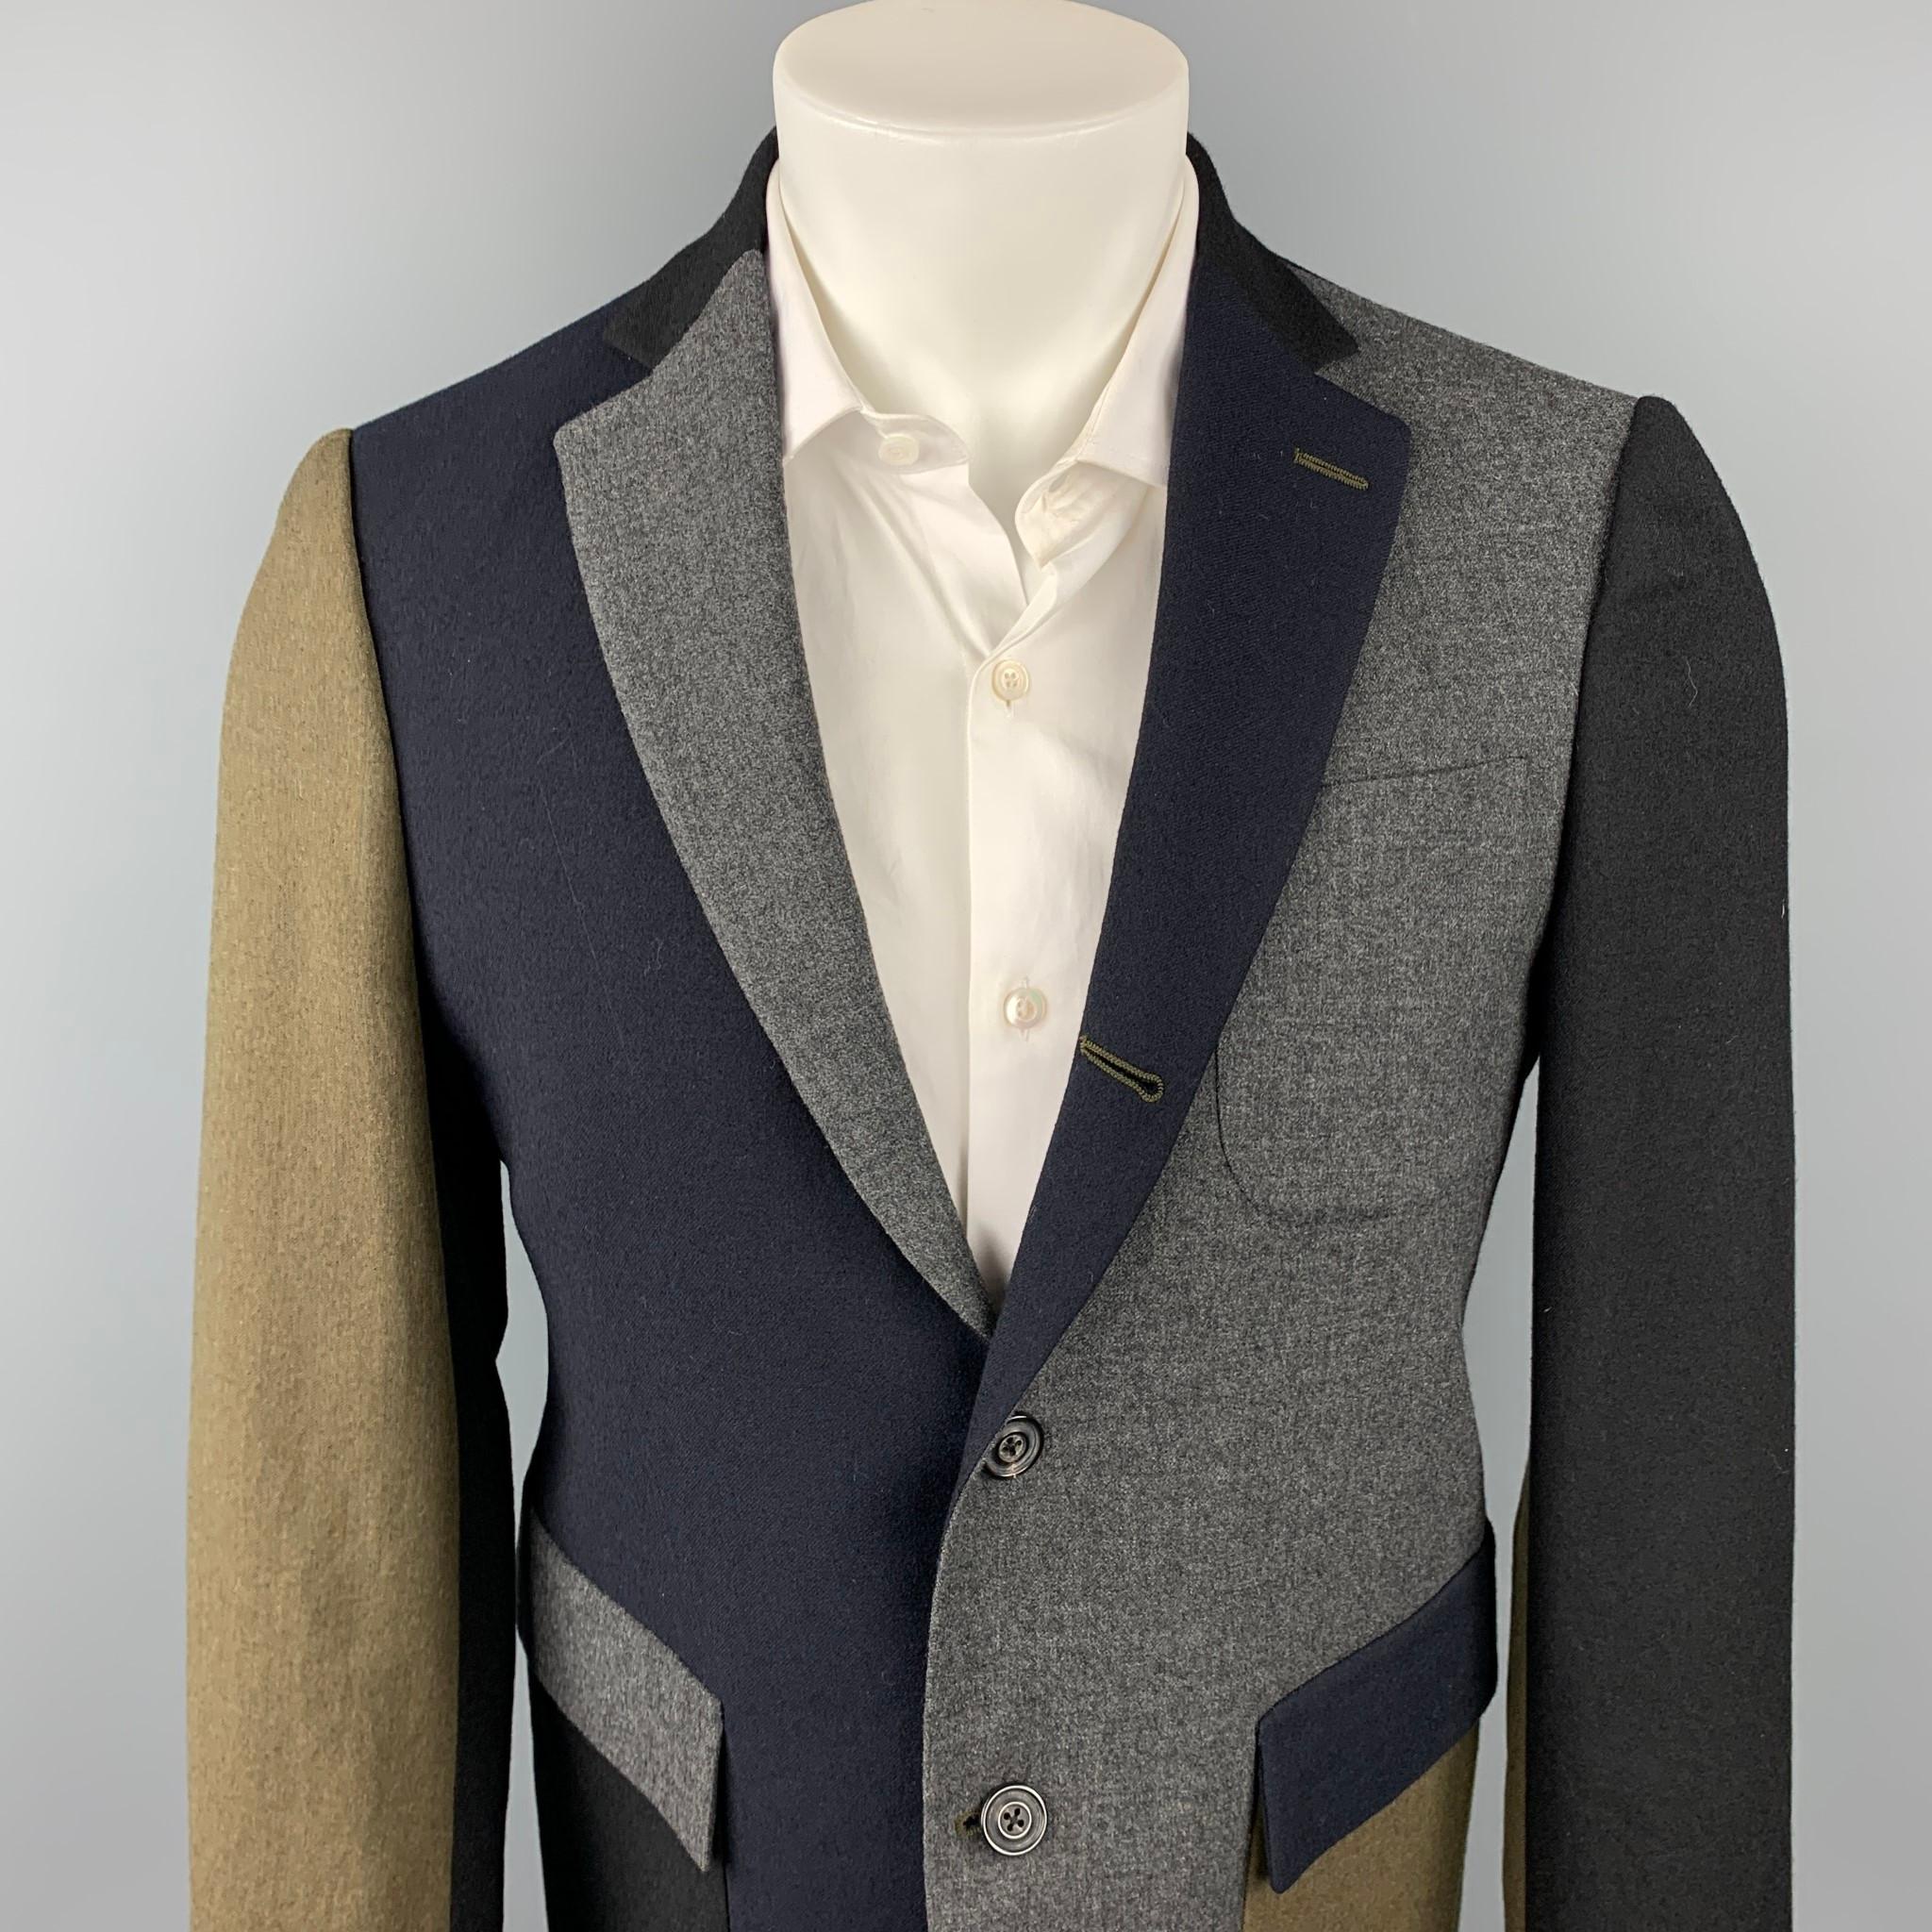 WOOSTER + LARDINI sport coat comes in a navy & grey color block wool with a full liner featuring a notch lapel, flap pockets, and a three button closure. Made in Italy.

Very Good Pre-Owned Condition.
Marked: IT 48

Measurements:

Shoulder: 17.5